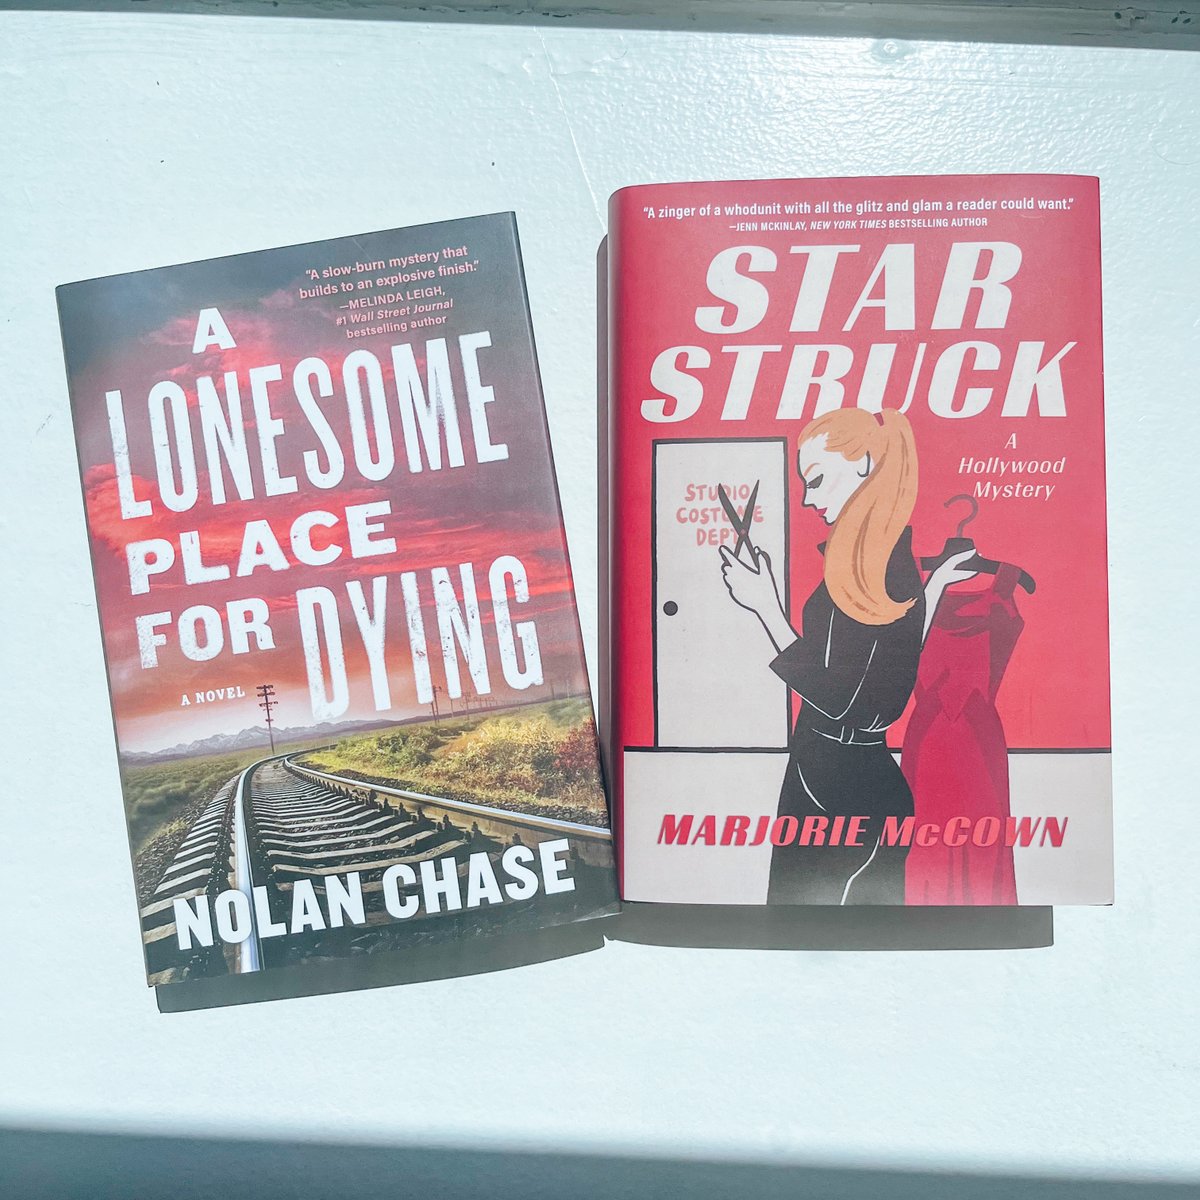 📣May brings mayhem and mysteries! Happy #pubday to our May authors🥳! 🛤️A LONESOME PLACE FOR DYING by @sam_wiebe ⭐STAR STRUCK by @eastlamm #tbrlist #bookrecs #mysteryreads #bookstagram #thrillerbooks #thrillerreads #crimereads #cozymystery #womansleuth #amateursleuth